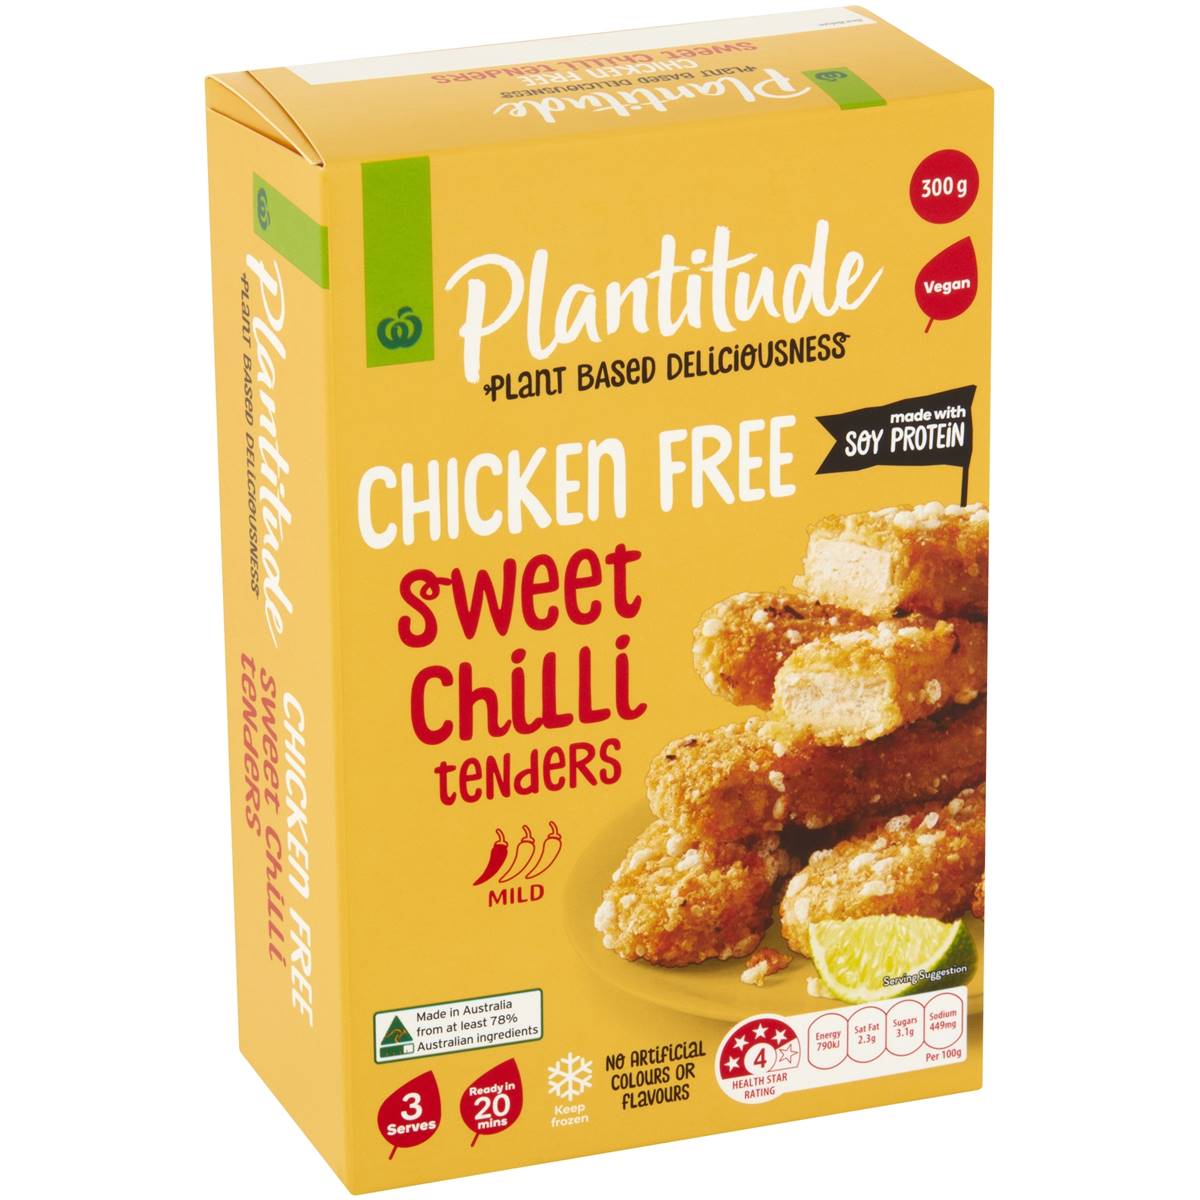 Calories in Woolworths Plantitude Chicken Free Sweet Chilli Tenders Mild